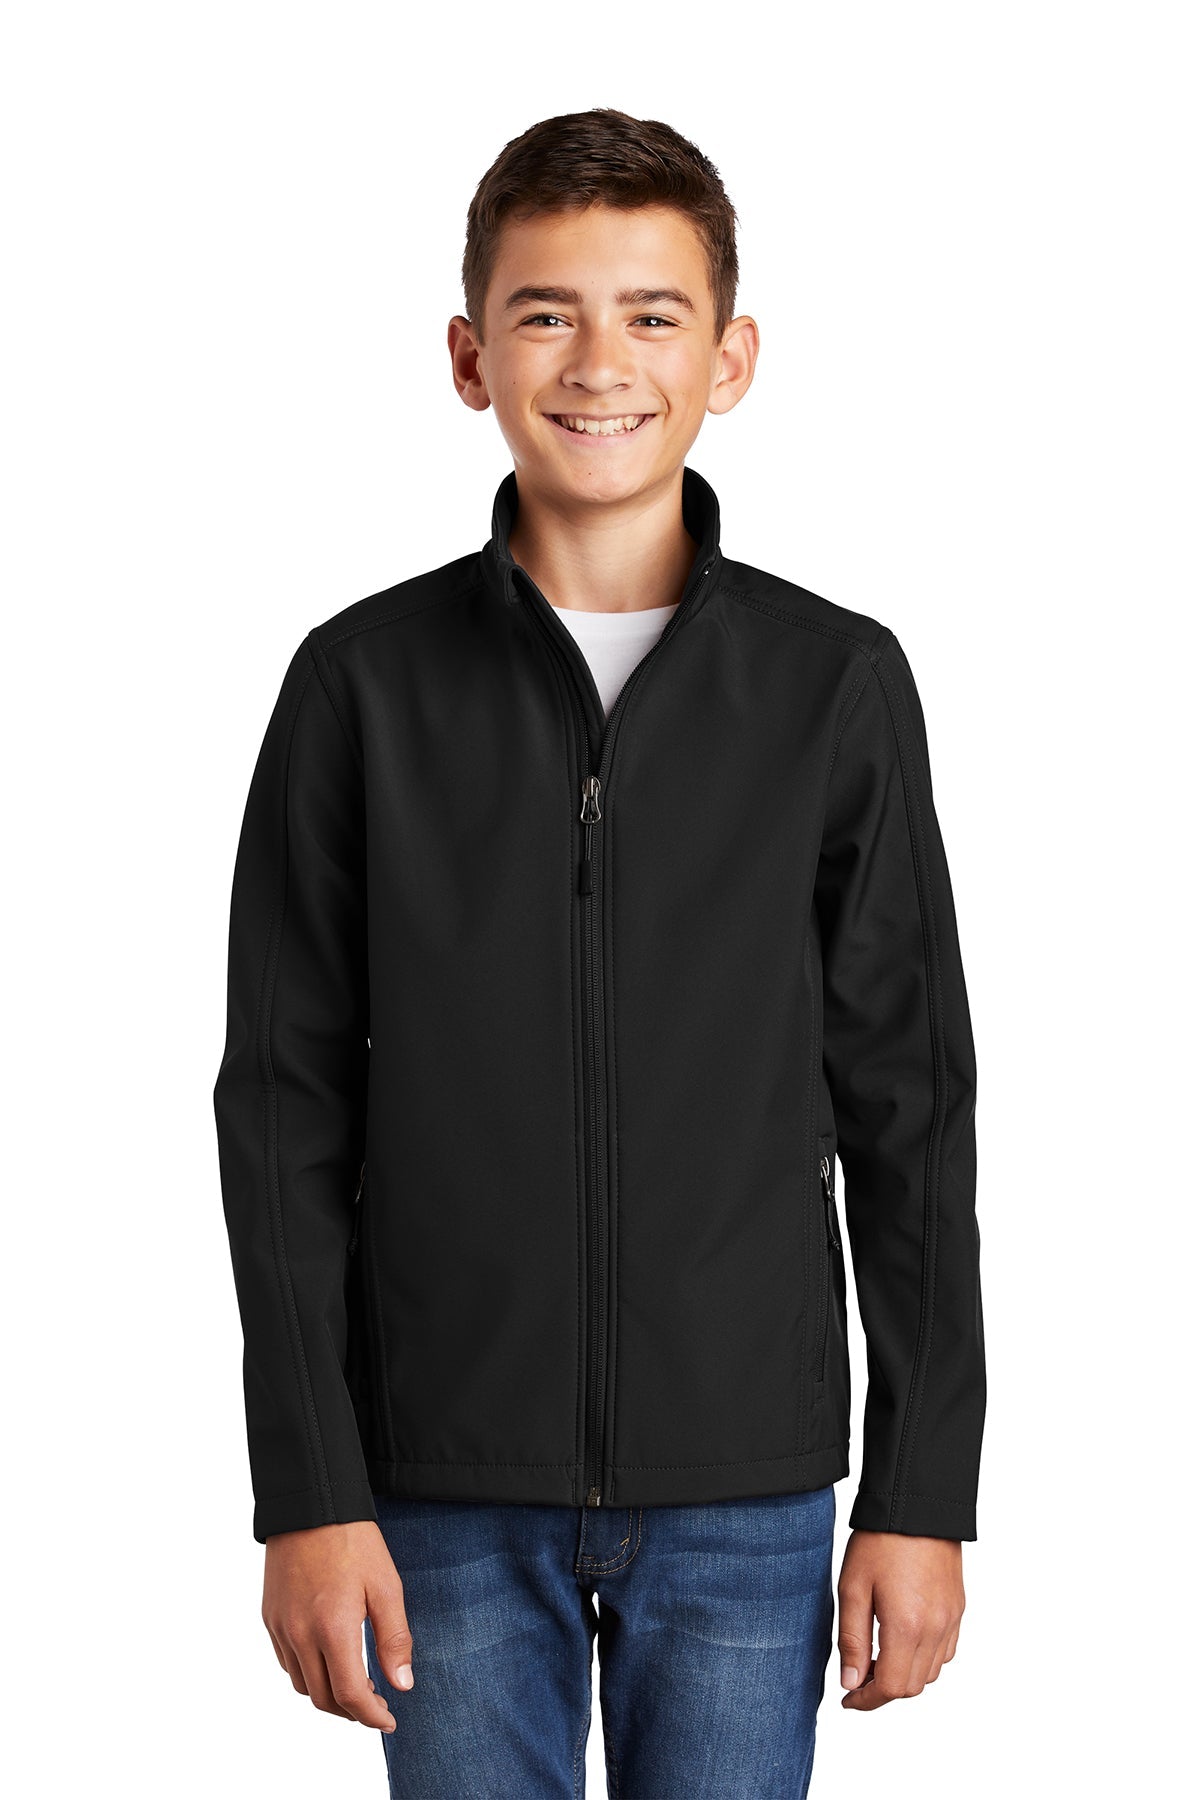 Y317 Port Authority® Youth Core Soft Shell Jacket